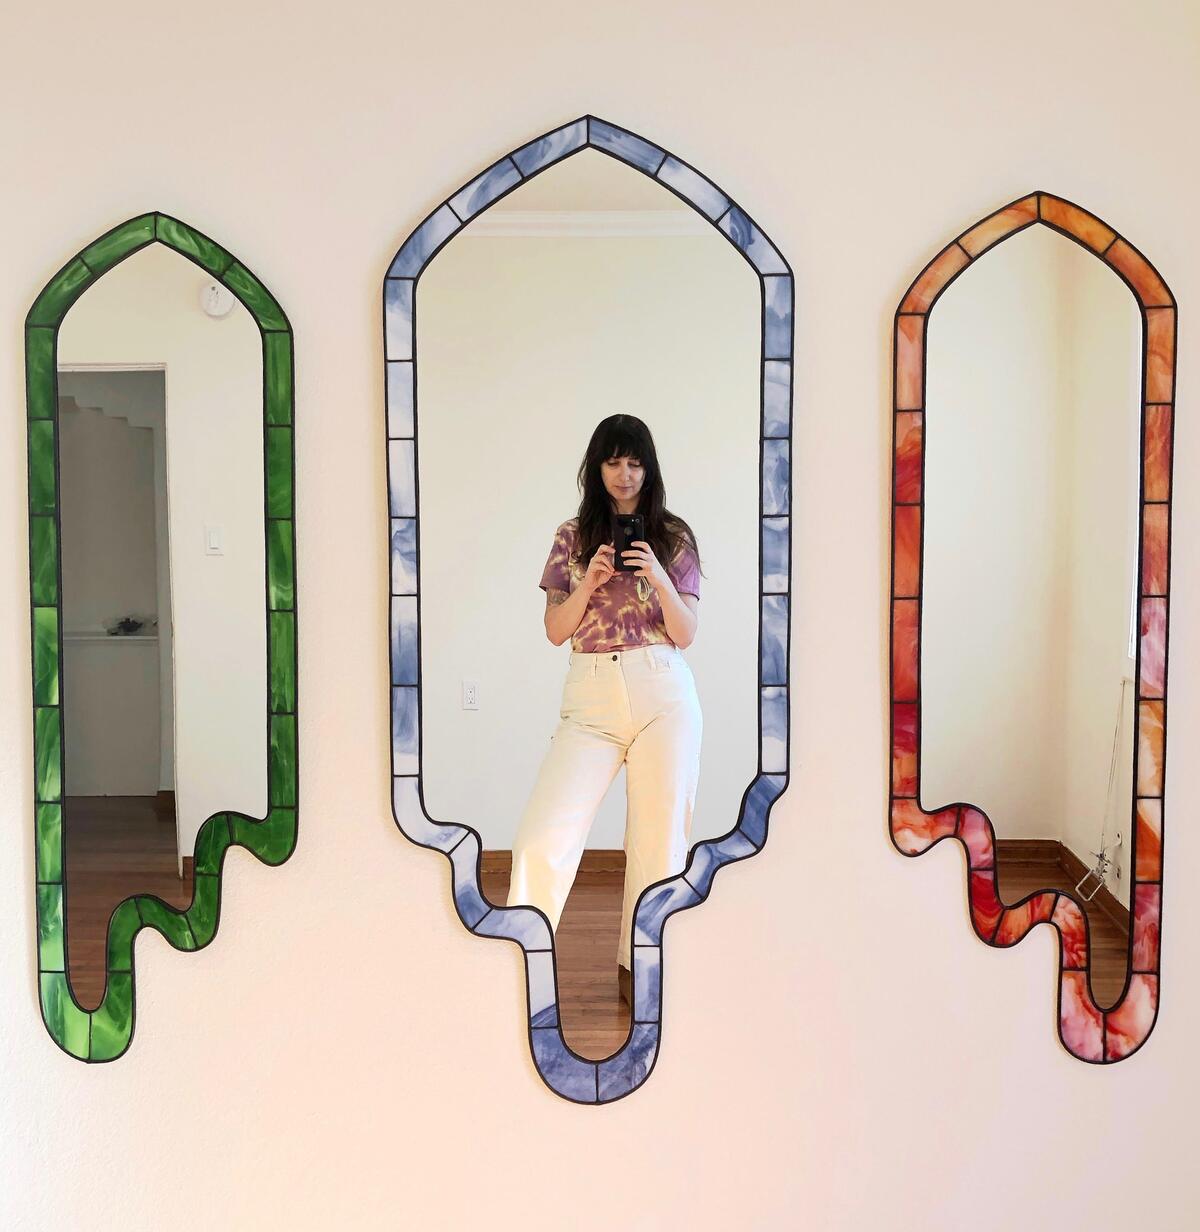 This L.A. glass artist is making some seriously psychedelic mirrors